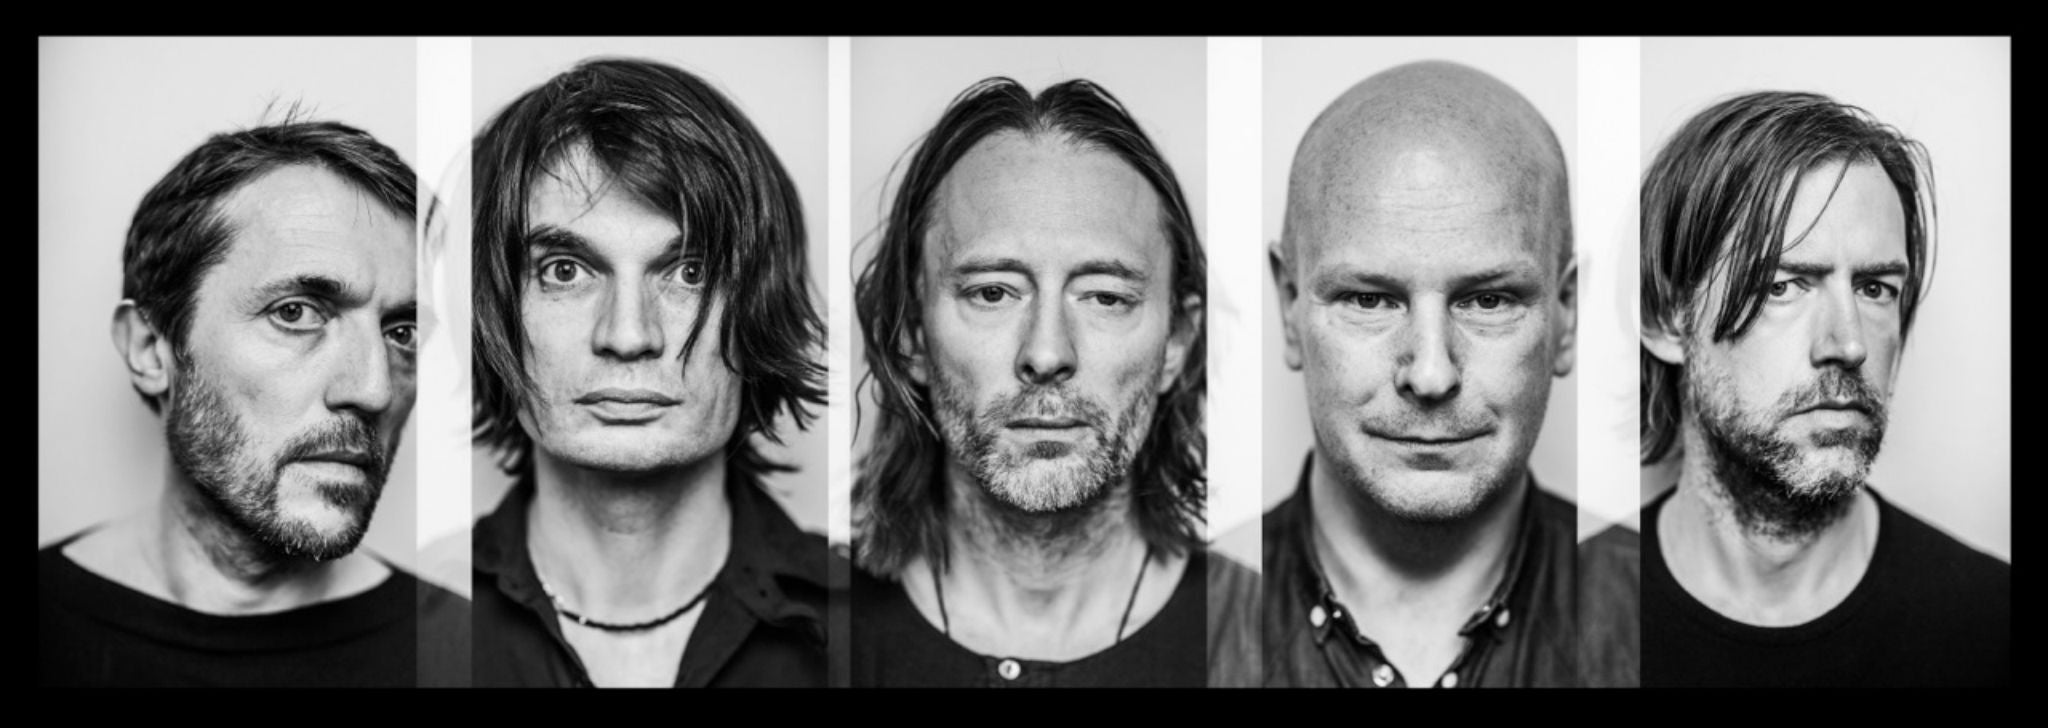 Radiohead's upcoming album will be the follow-up to 2011's King of Limbs